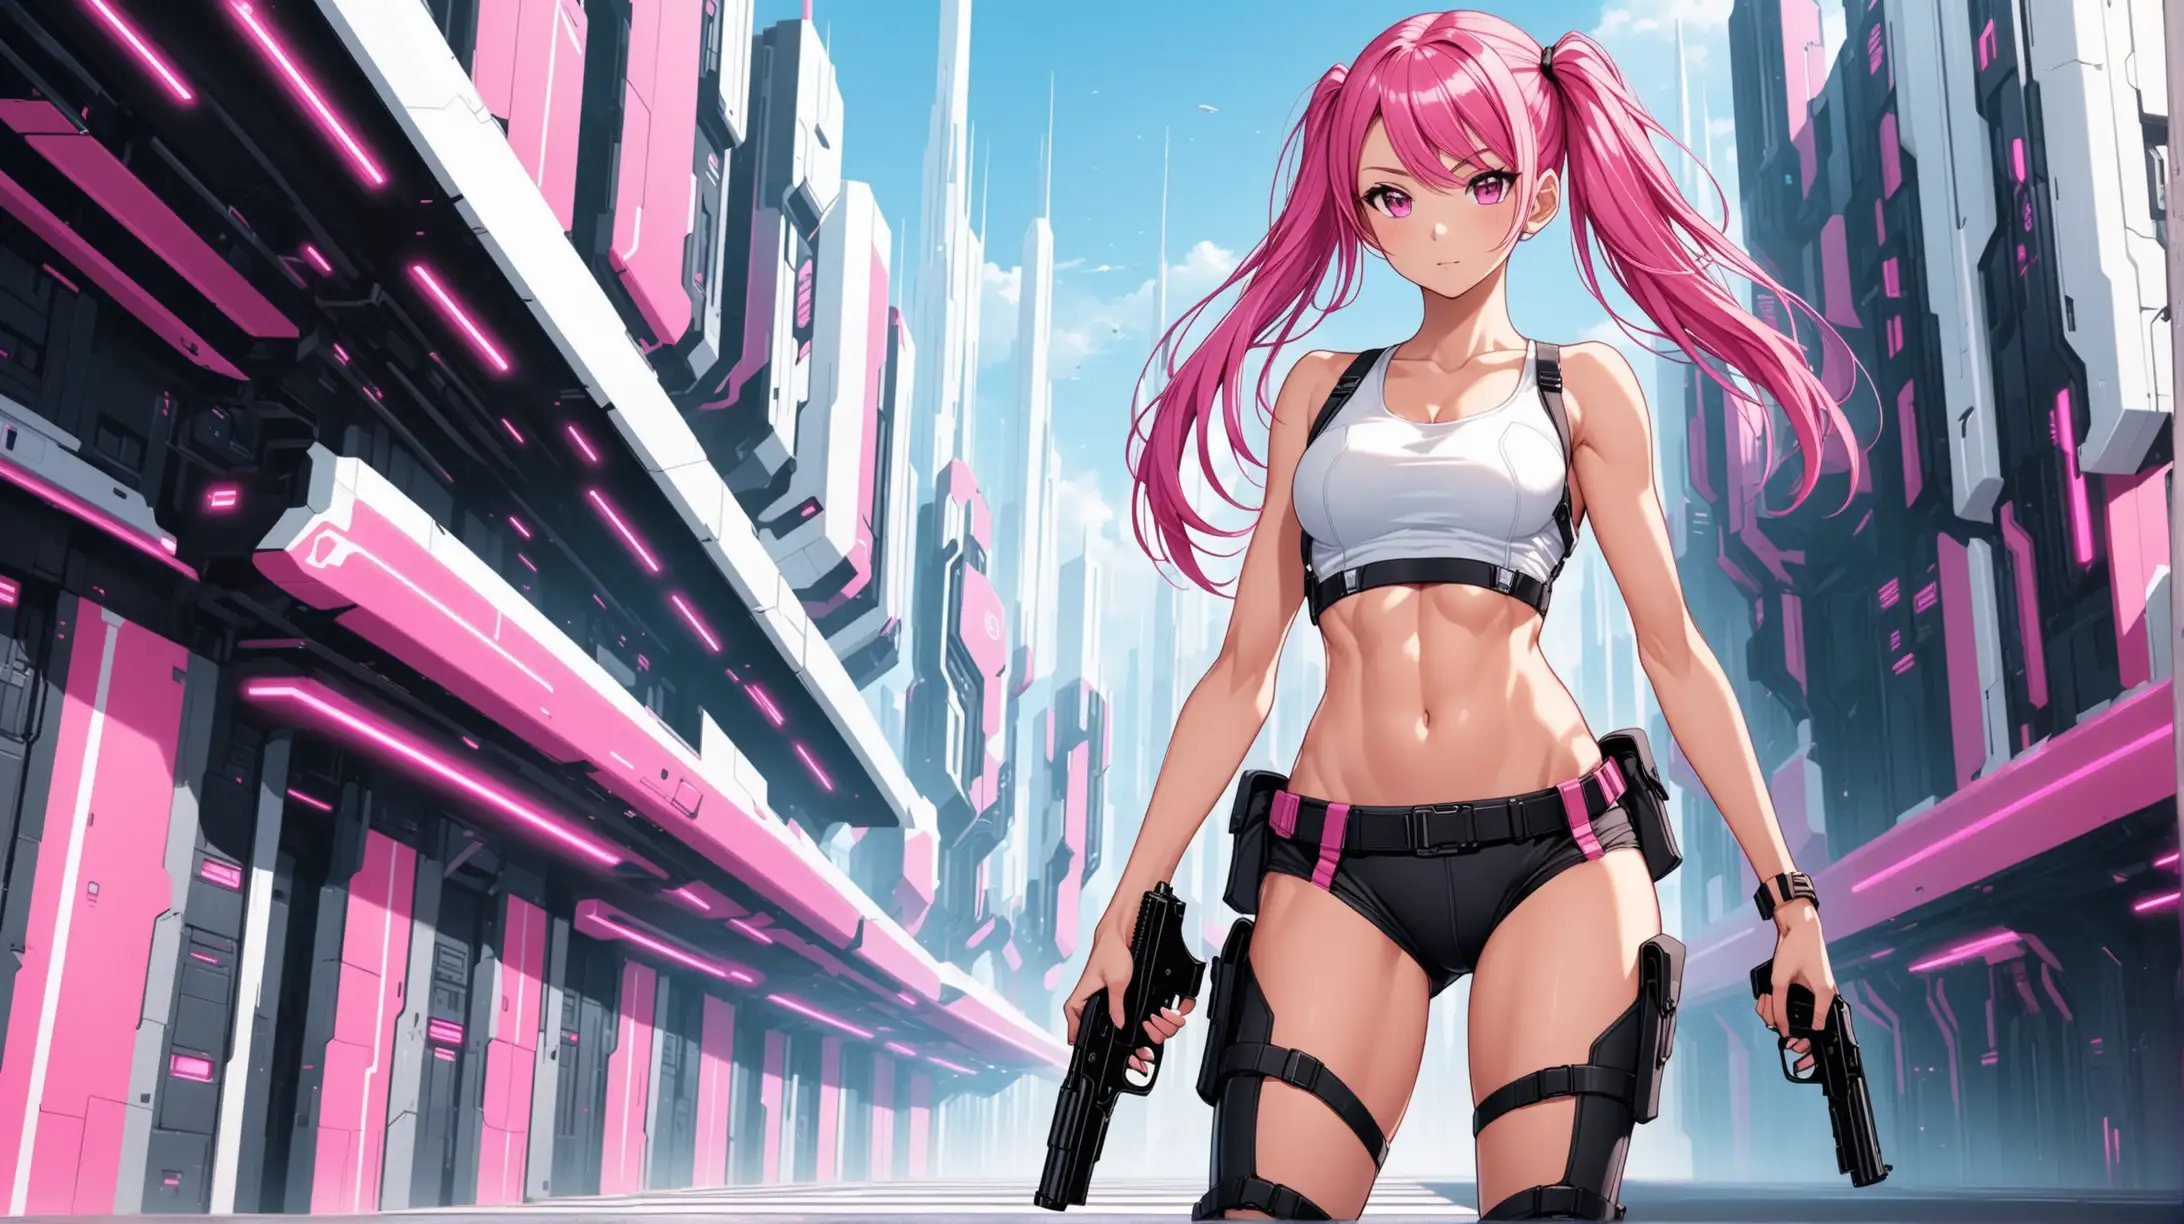 sexy fit 24 year old hero girl, pink pigtails, pink eyes, posing with handguns in futuristic town, super skinny toned body, short white tank top, sexy midriff, wearing suspenders, holsters on each thigh, combat boots, pink black white 3 color minimal design